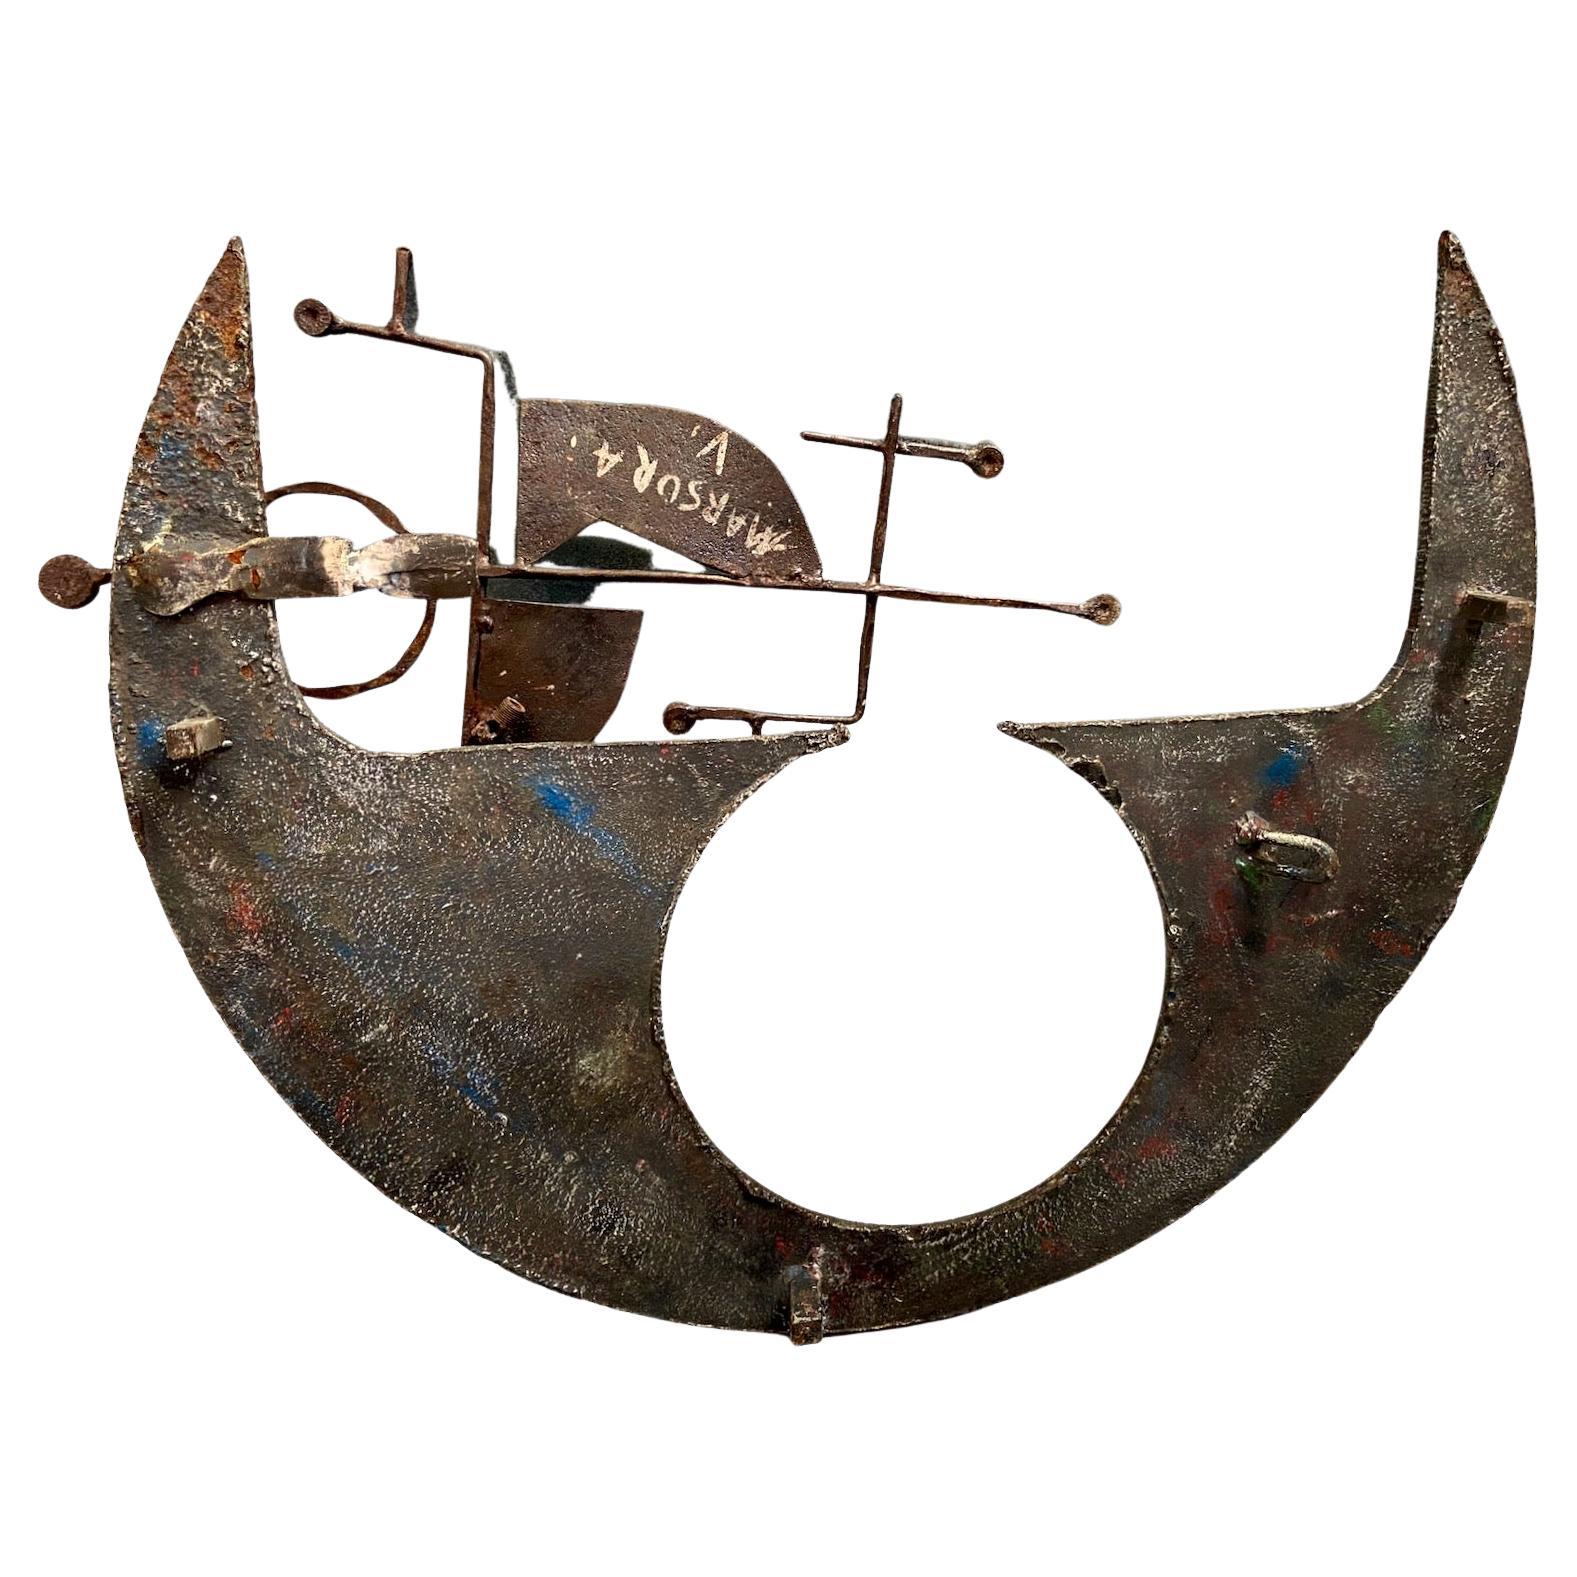 Mid-Century Modern Wrought Iron and Enamel Brutalist Wall Sculpture by Salvino Marsura circa 1970's For Sale